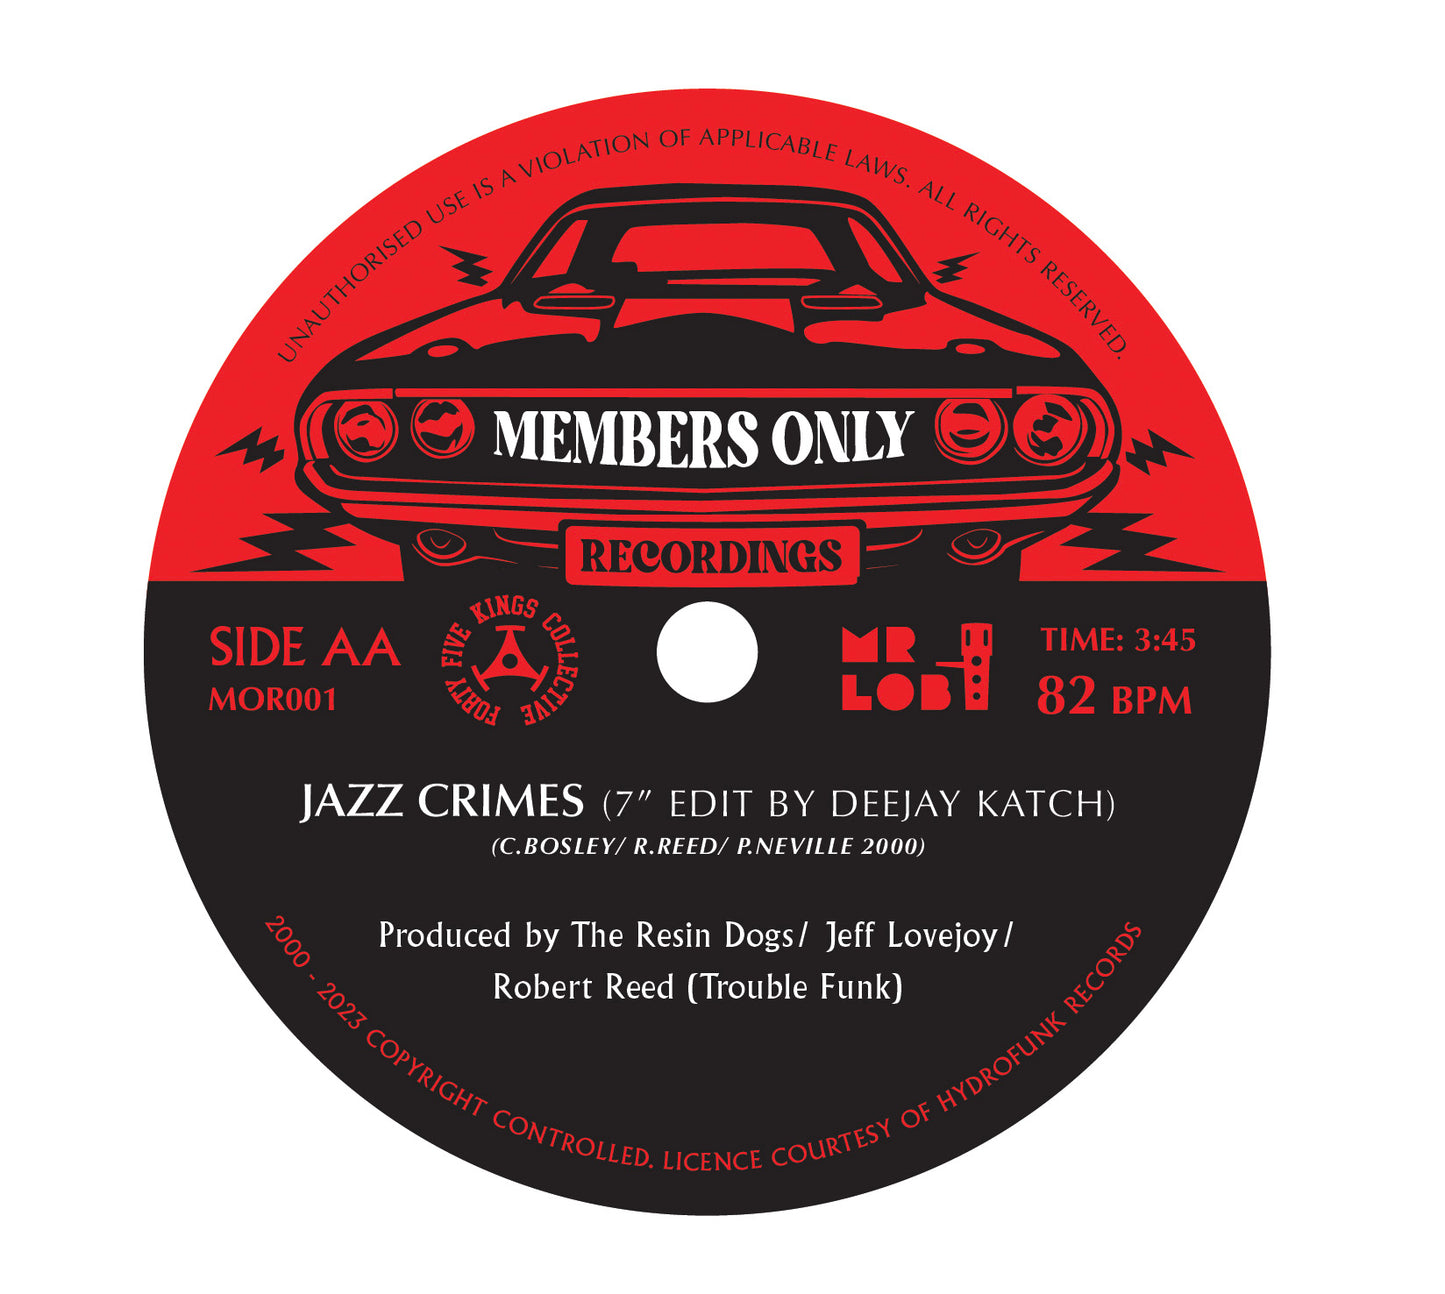 DJ Katch - Make My 45 the P Funk ft. Abstract Rude / Jazz Crimes (Resin dogs 45 mix)- 7″ Last 5